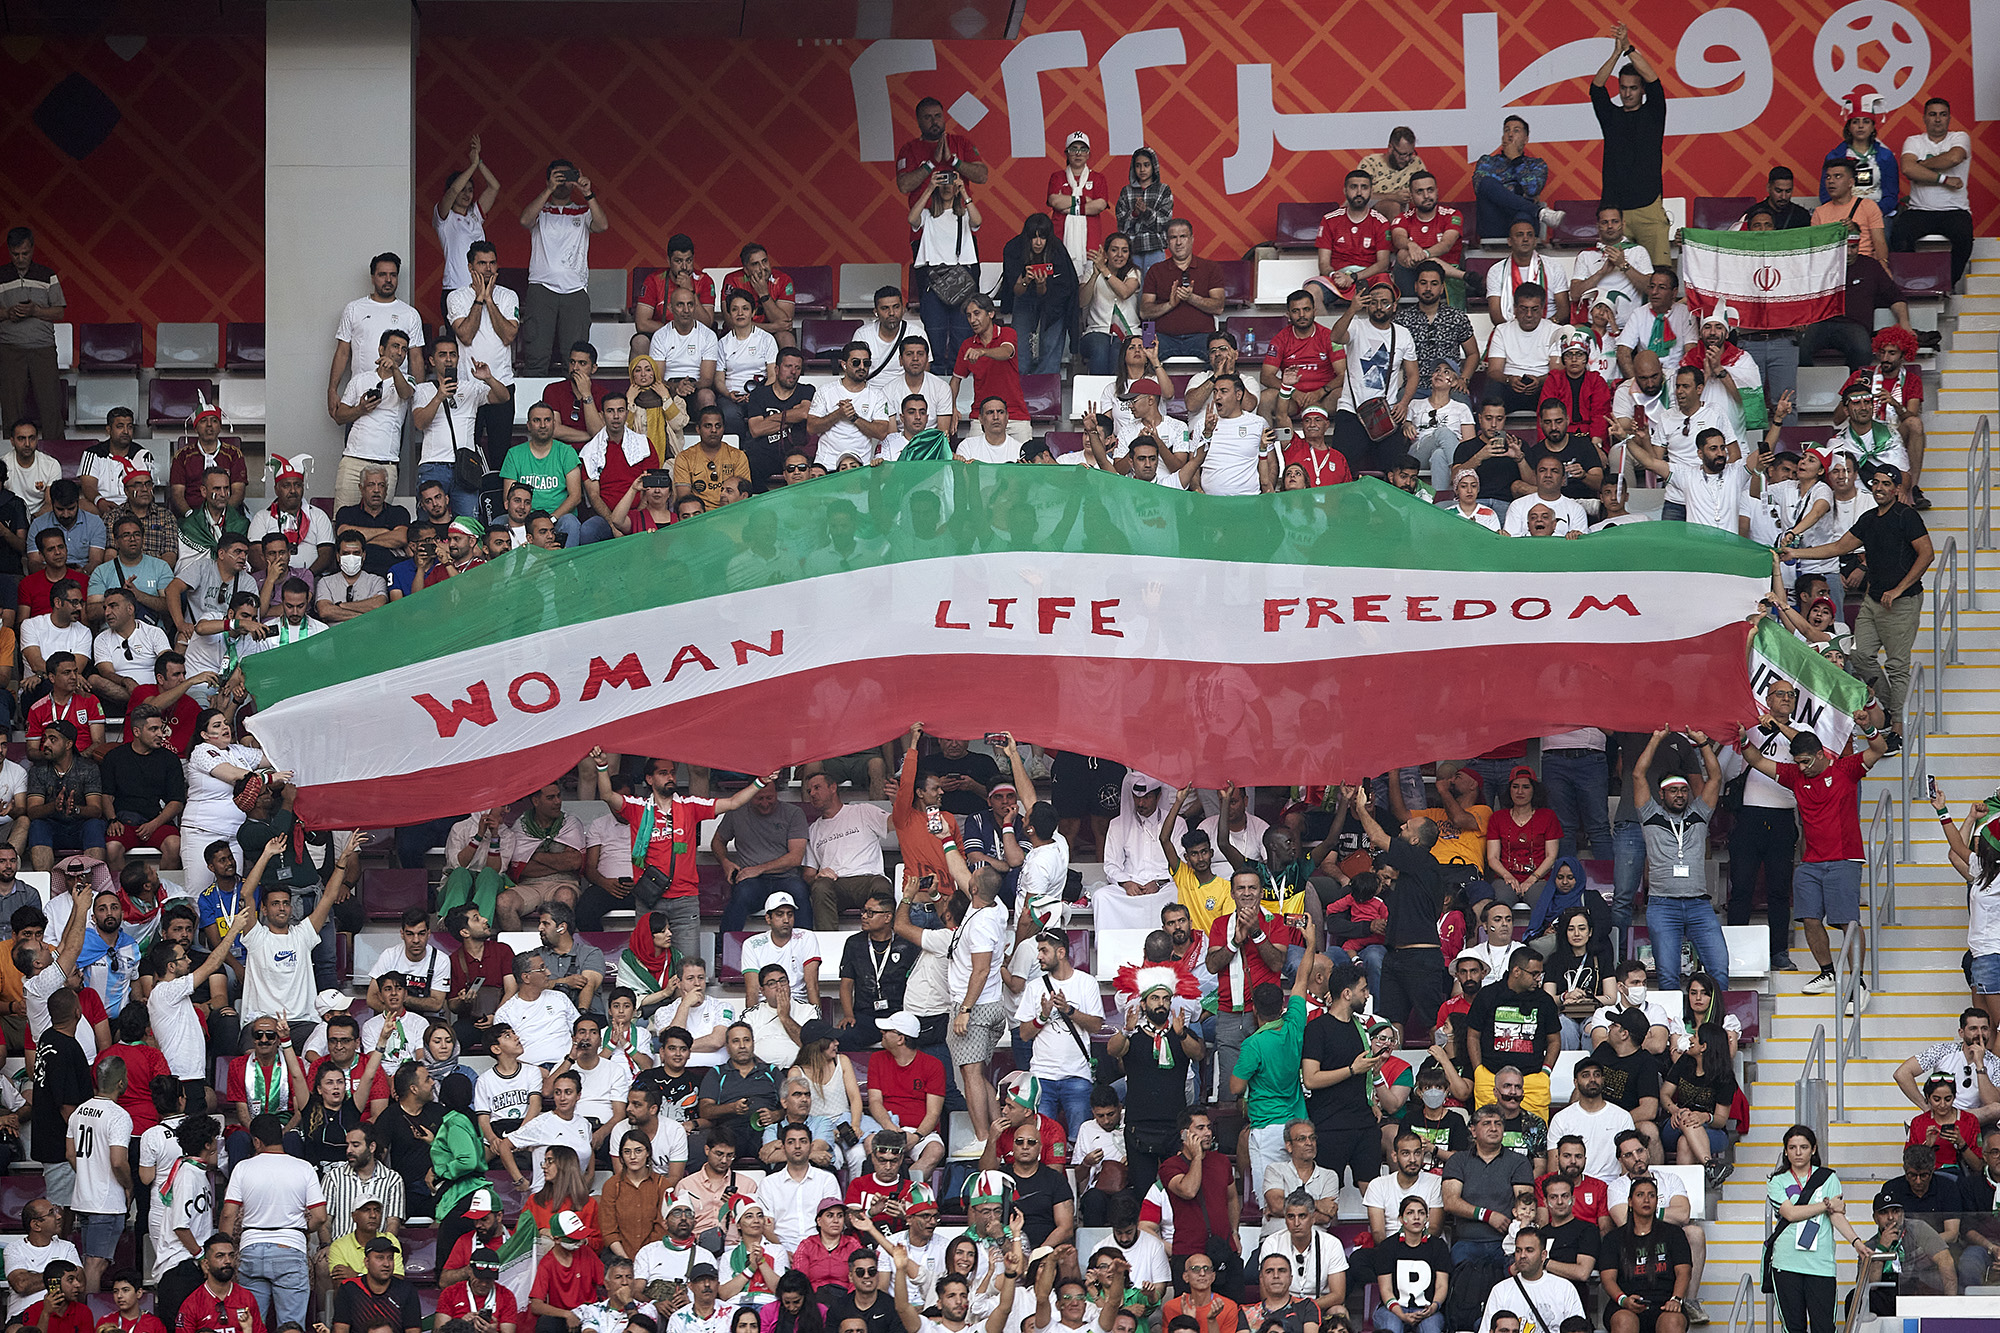 Iranian fans hold up signs "Woman Life Freedom" during their country's match against England in Doha.